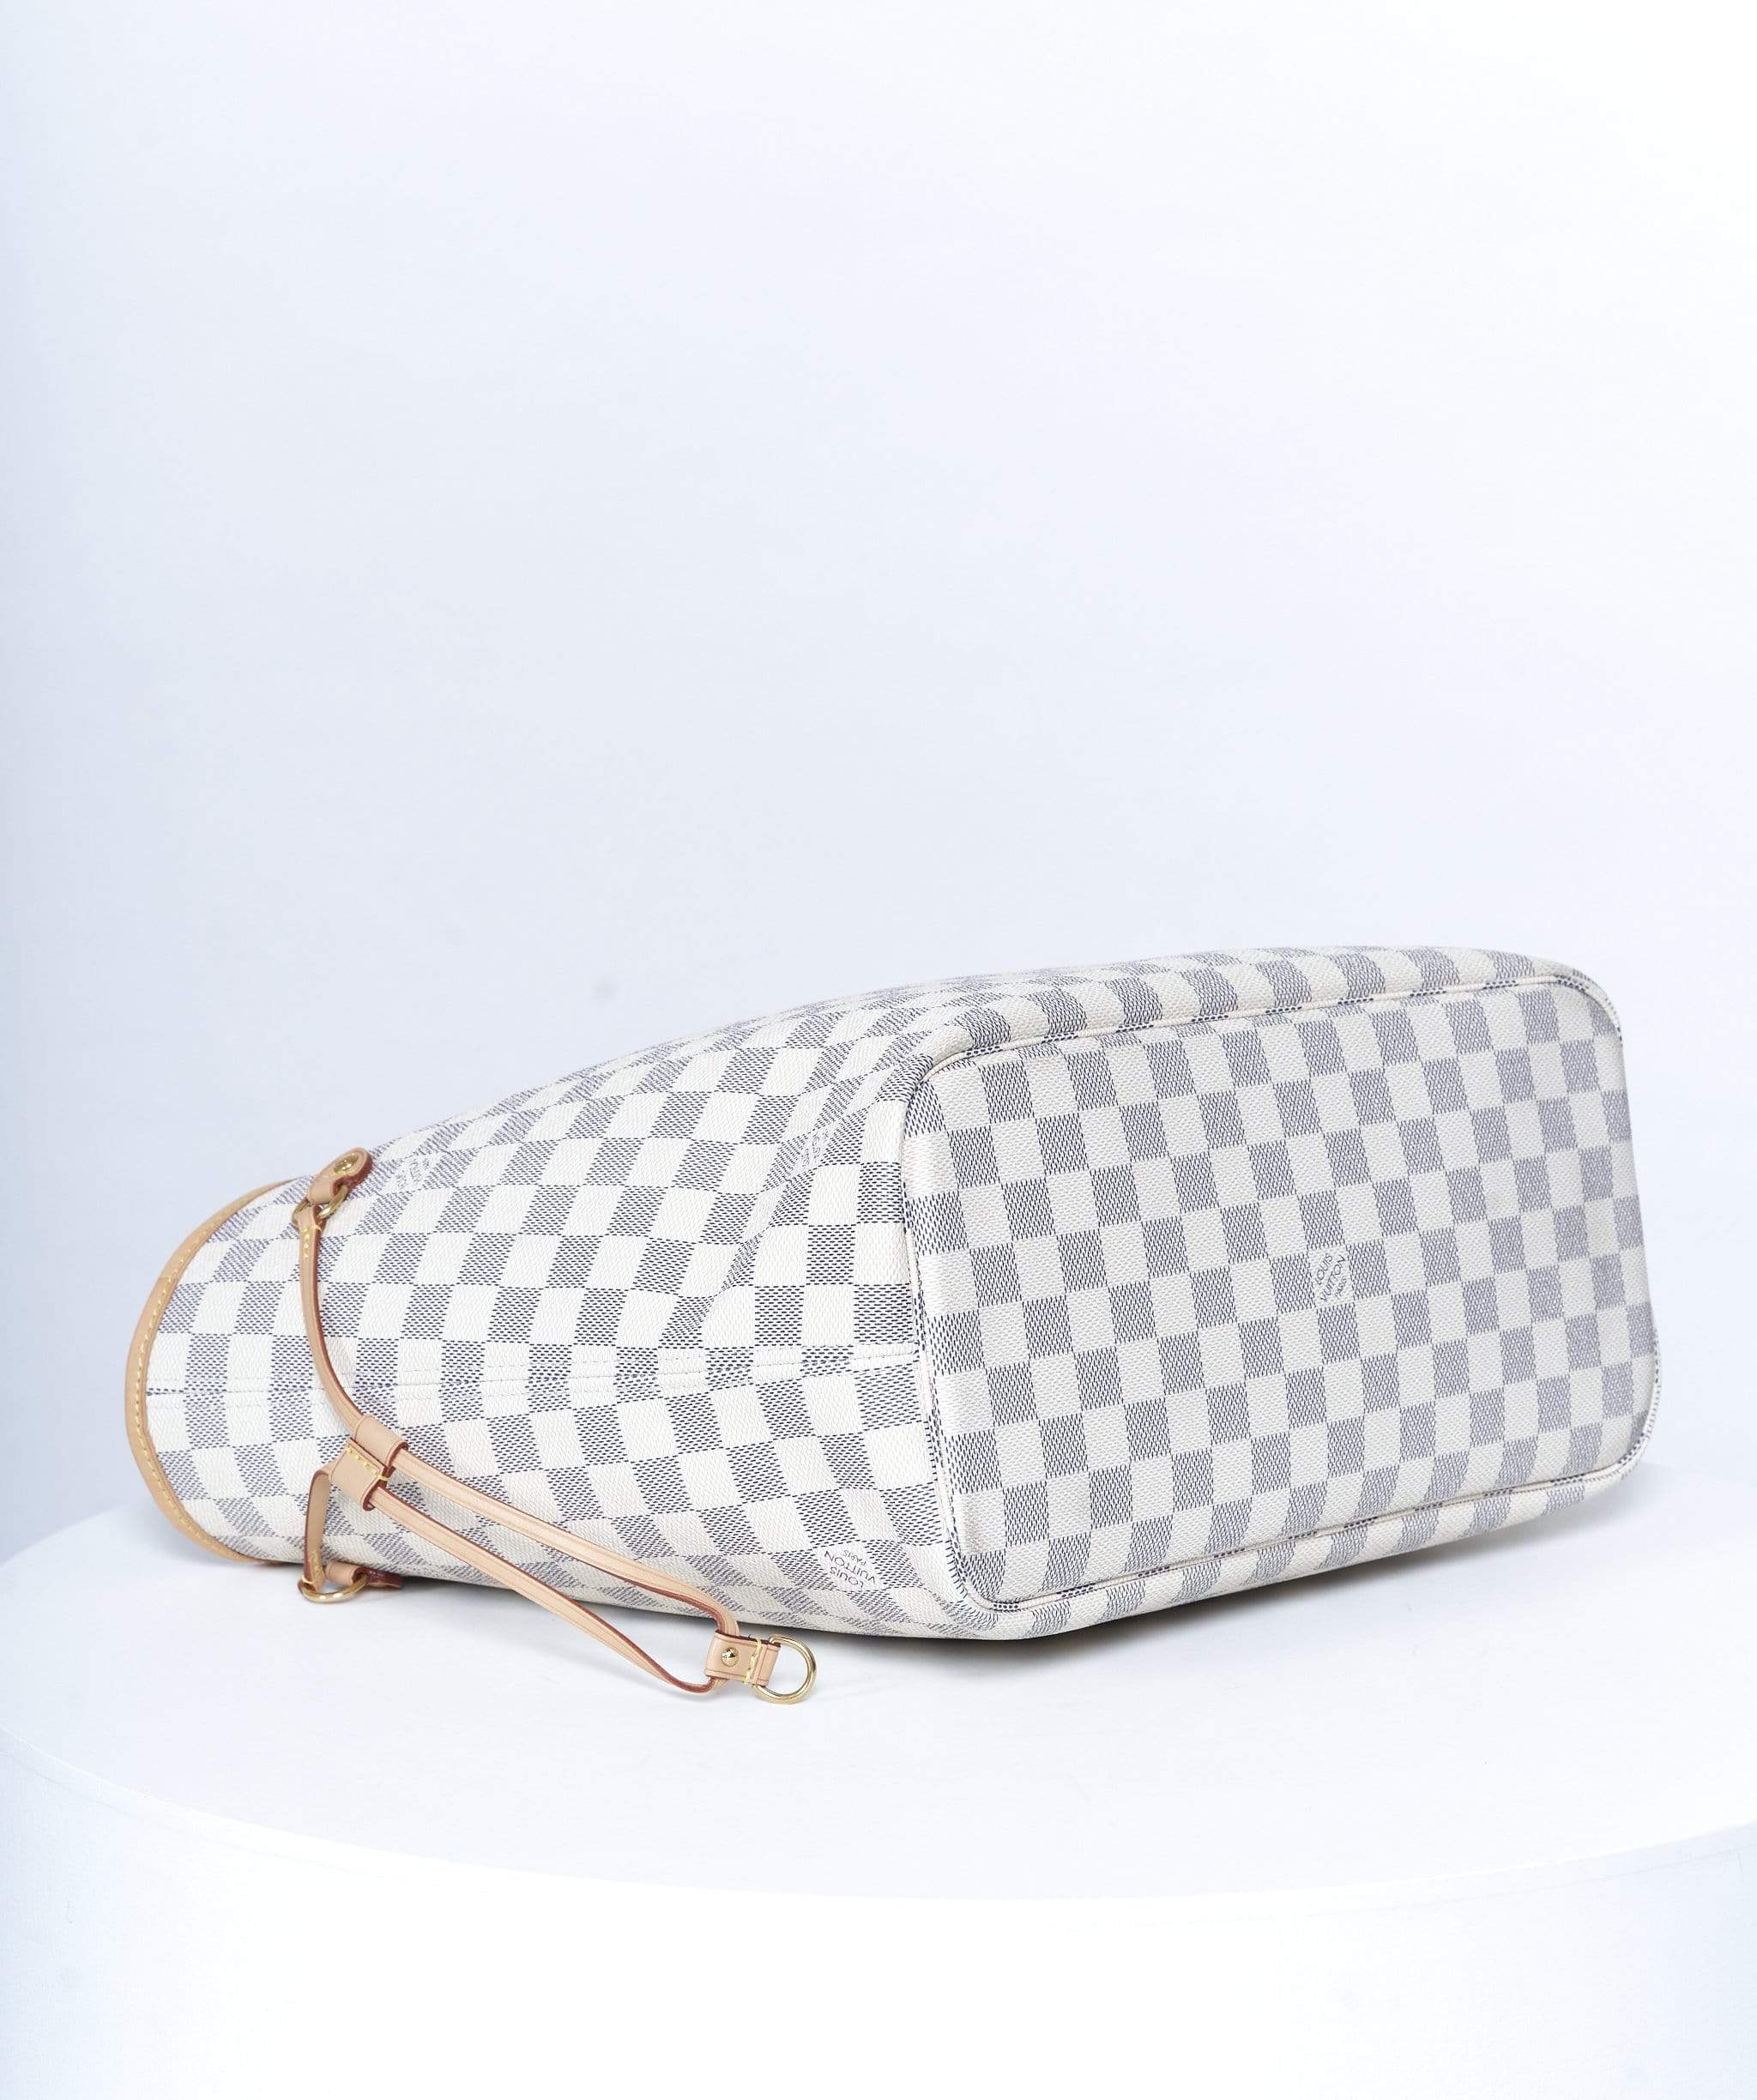 Louis Vuitton Louis Vuitton Neverfull Damier with Box and Dustbag MM